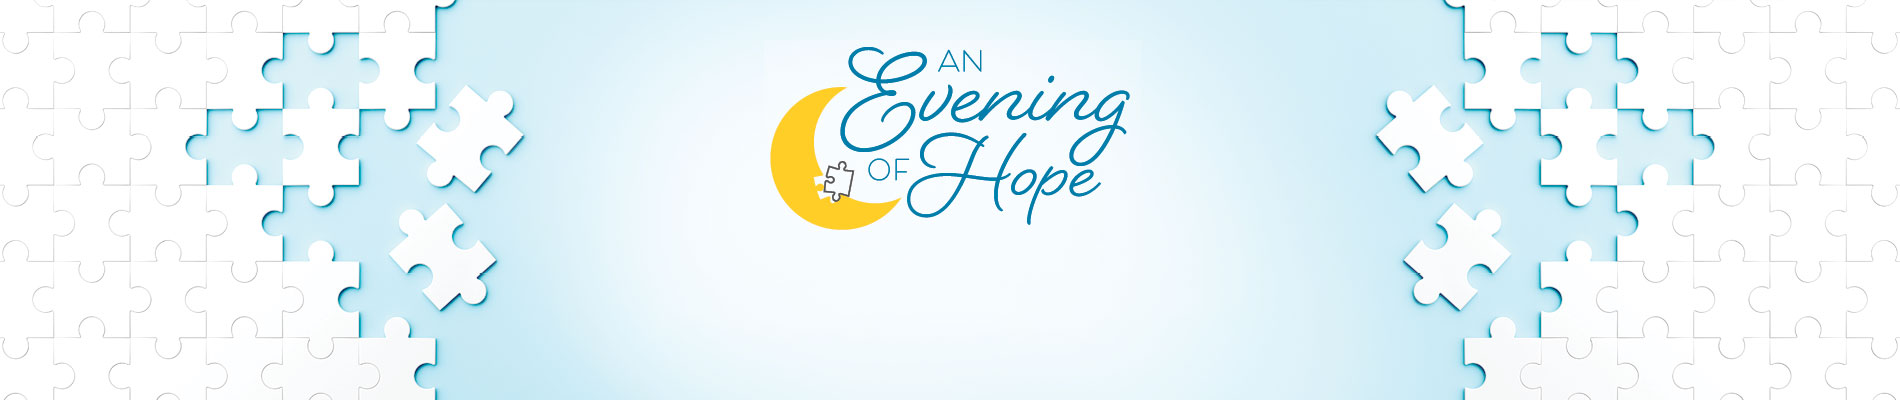 An Evening of Hope - WISH you could see the world through their eyes